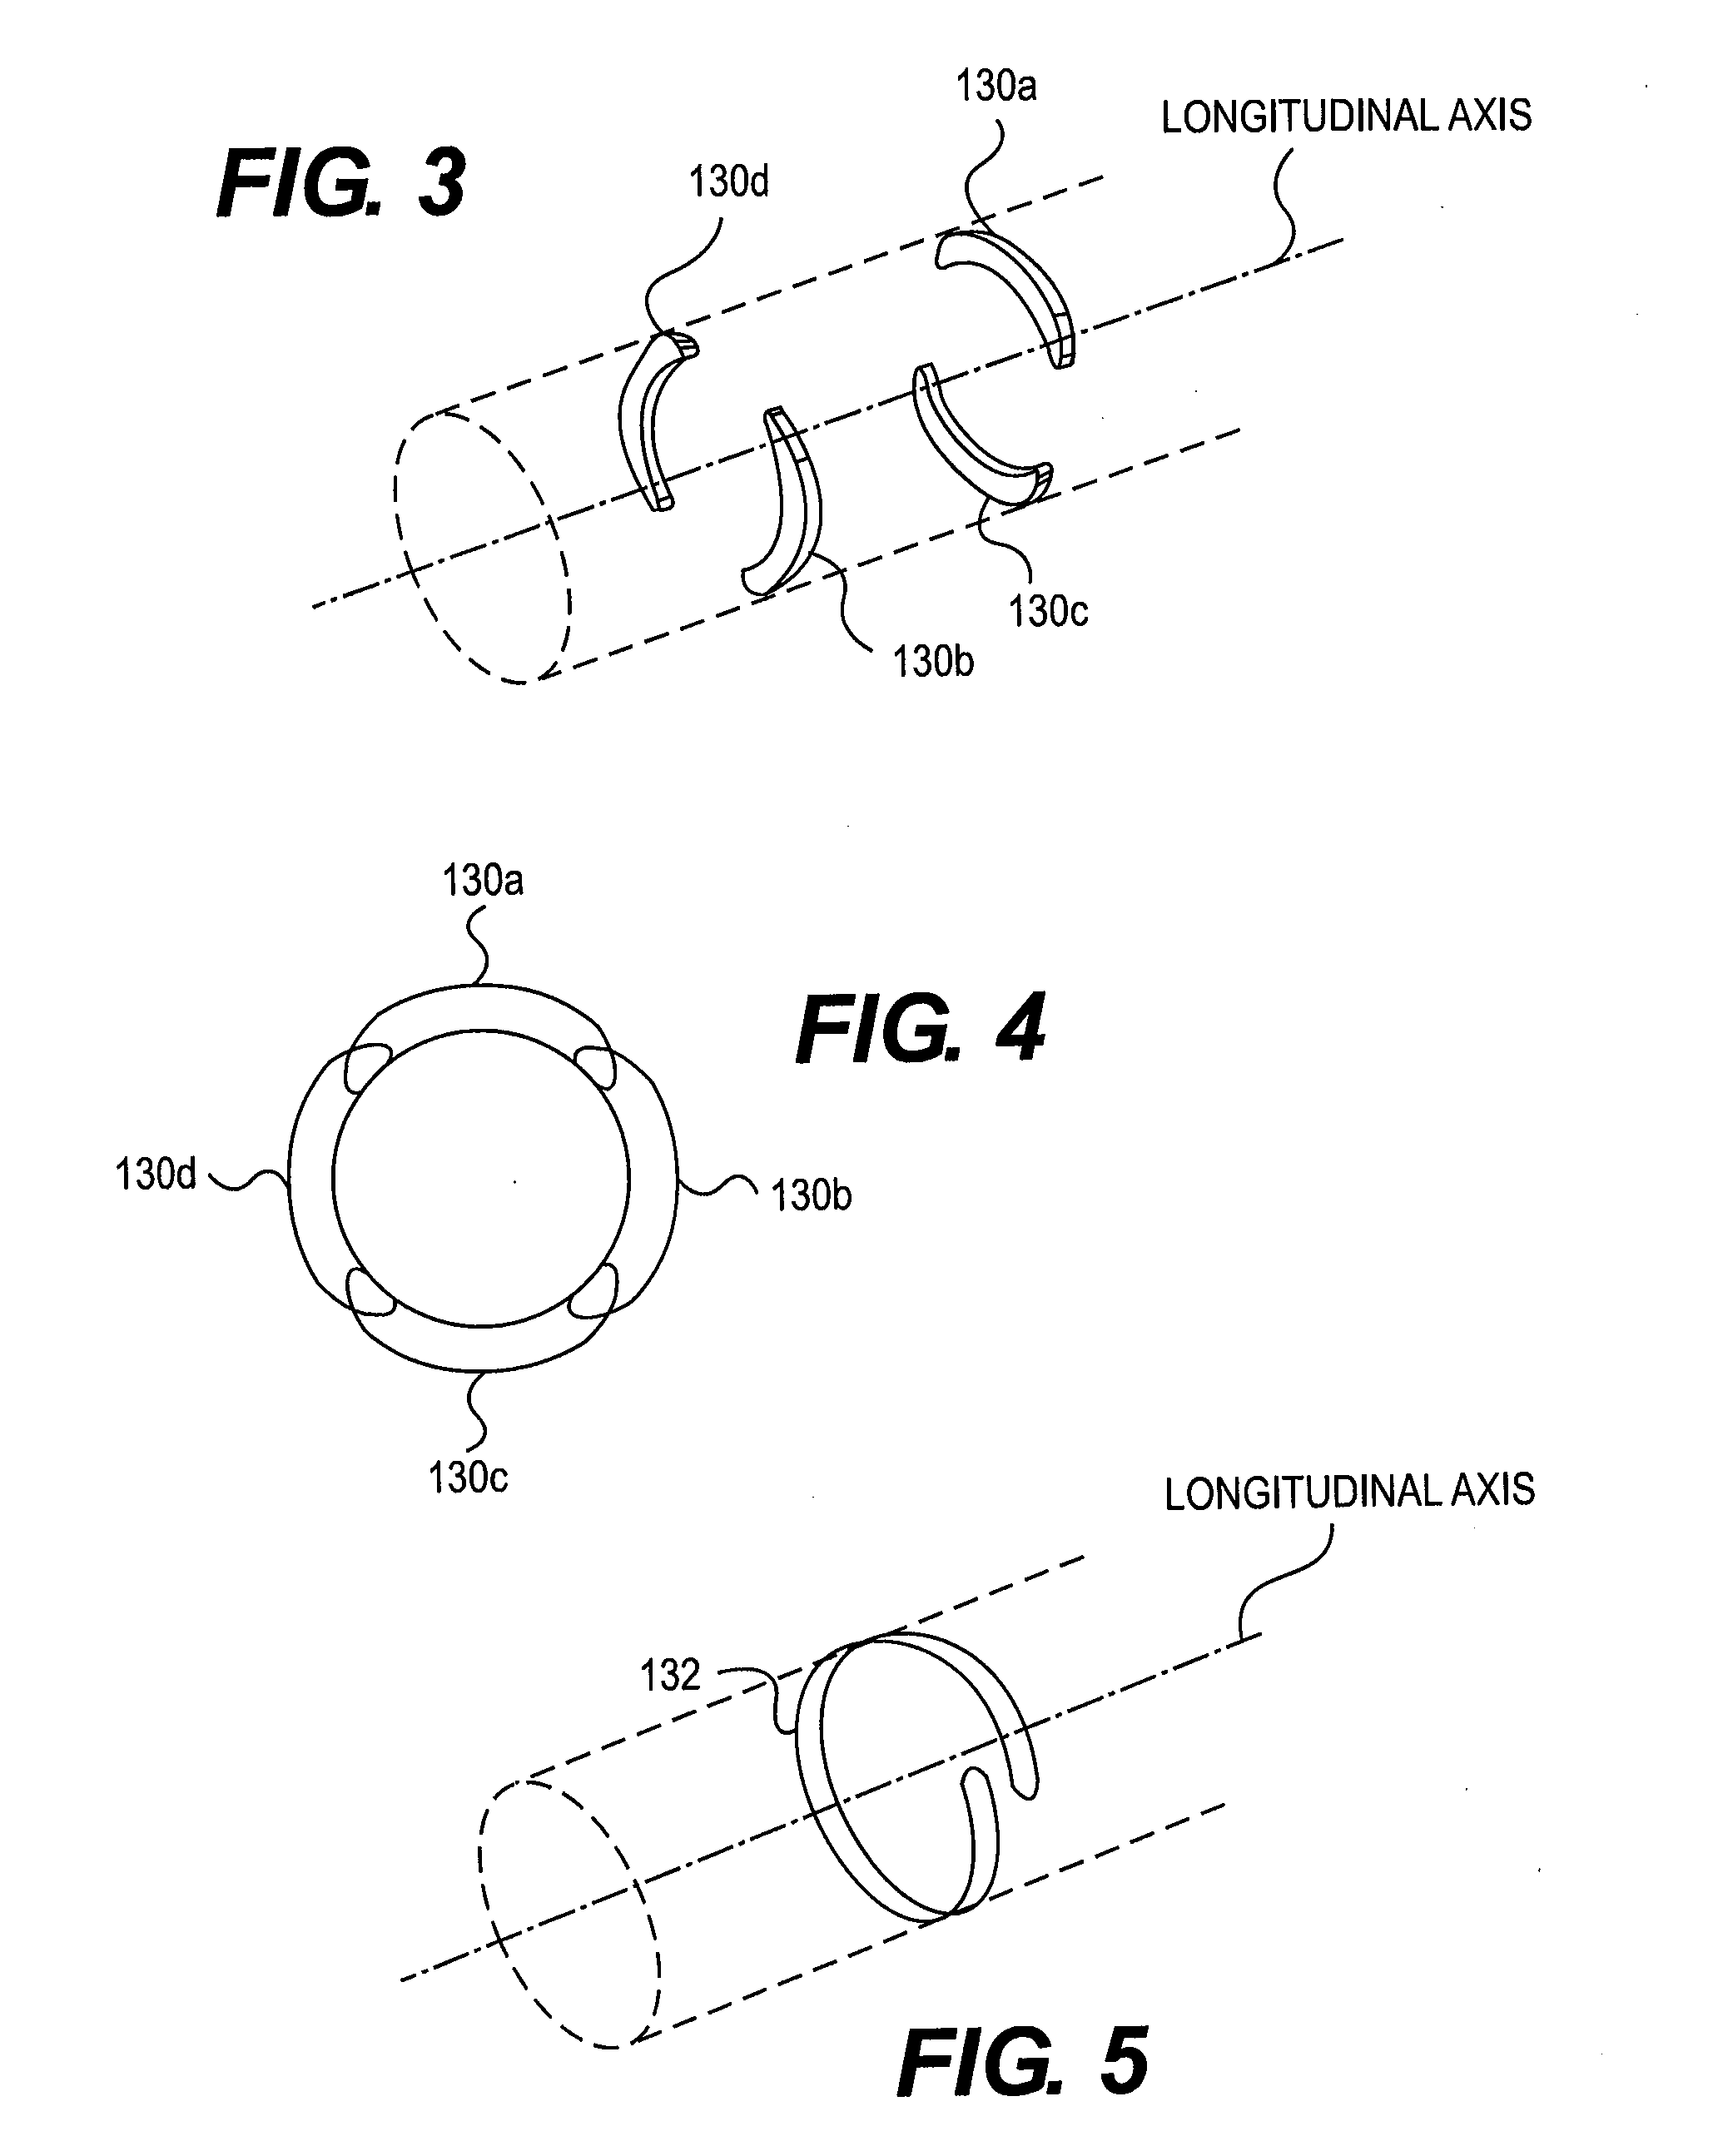 Catheter device and method for denervation